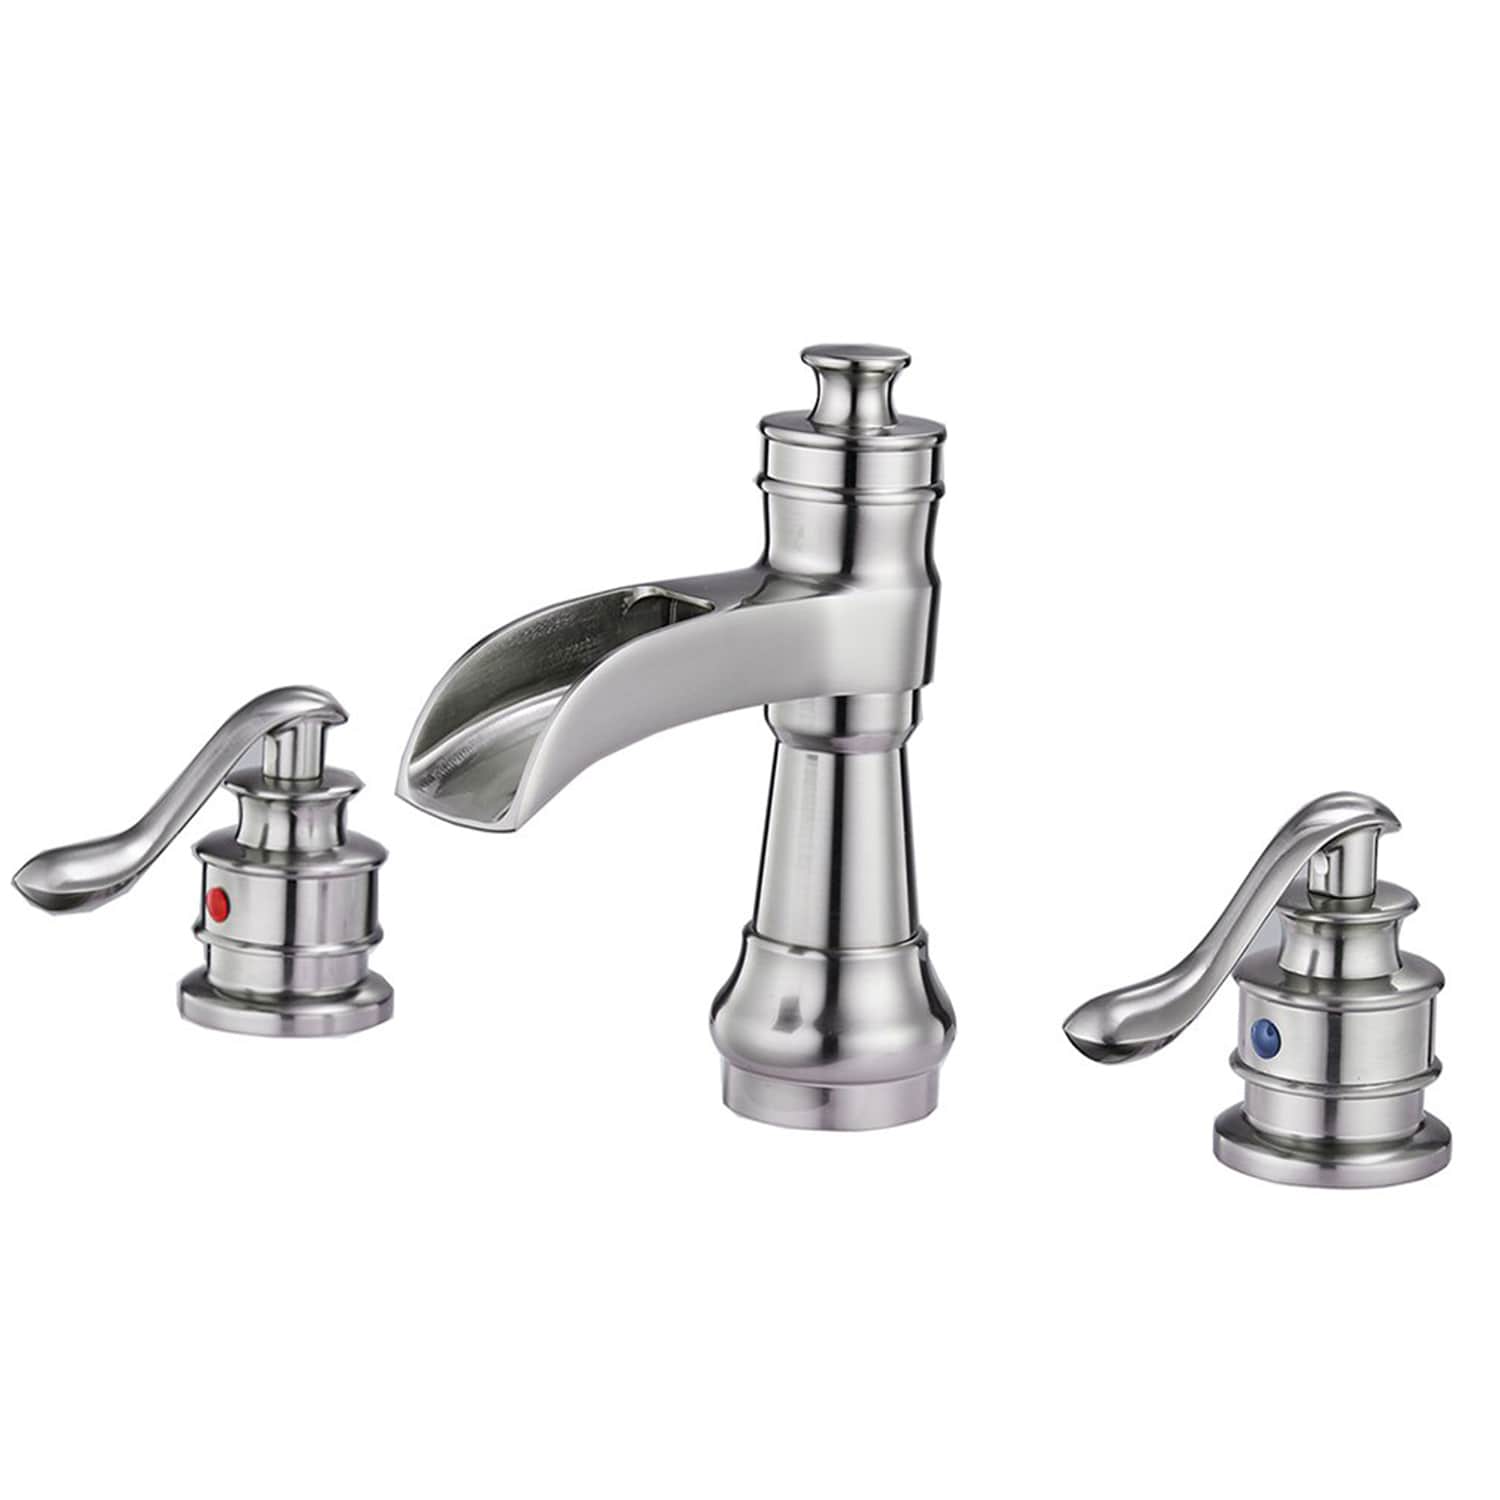 FOR HOME Bathroom Sink Faucets Brushed Nickel Widespread 2-handle Waterfall Bathroom Sink Faucet | - WELLFOR BFB5103GB -WF